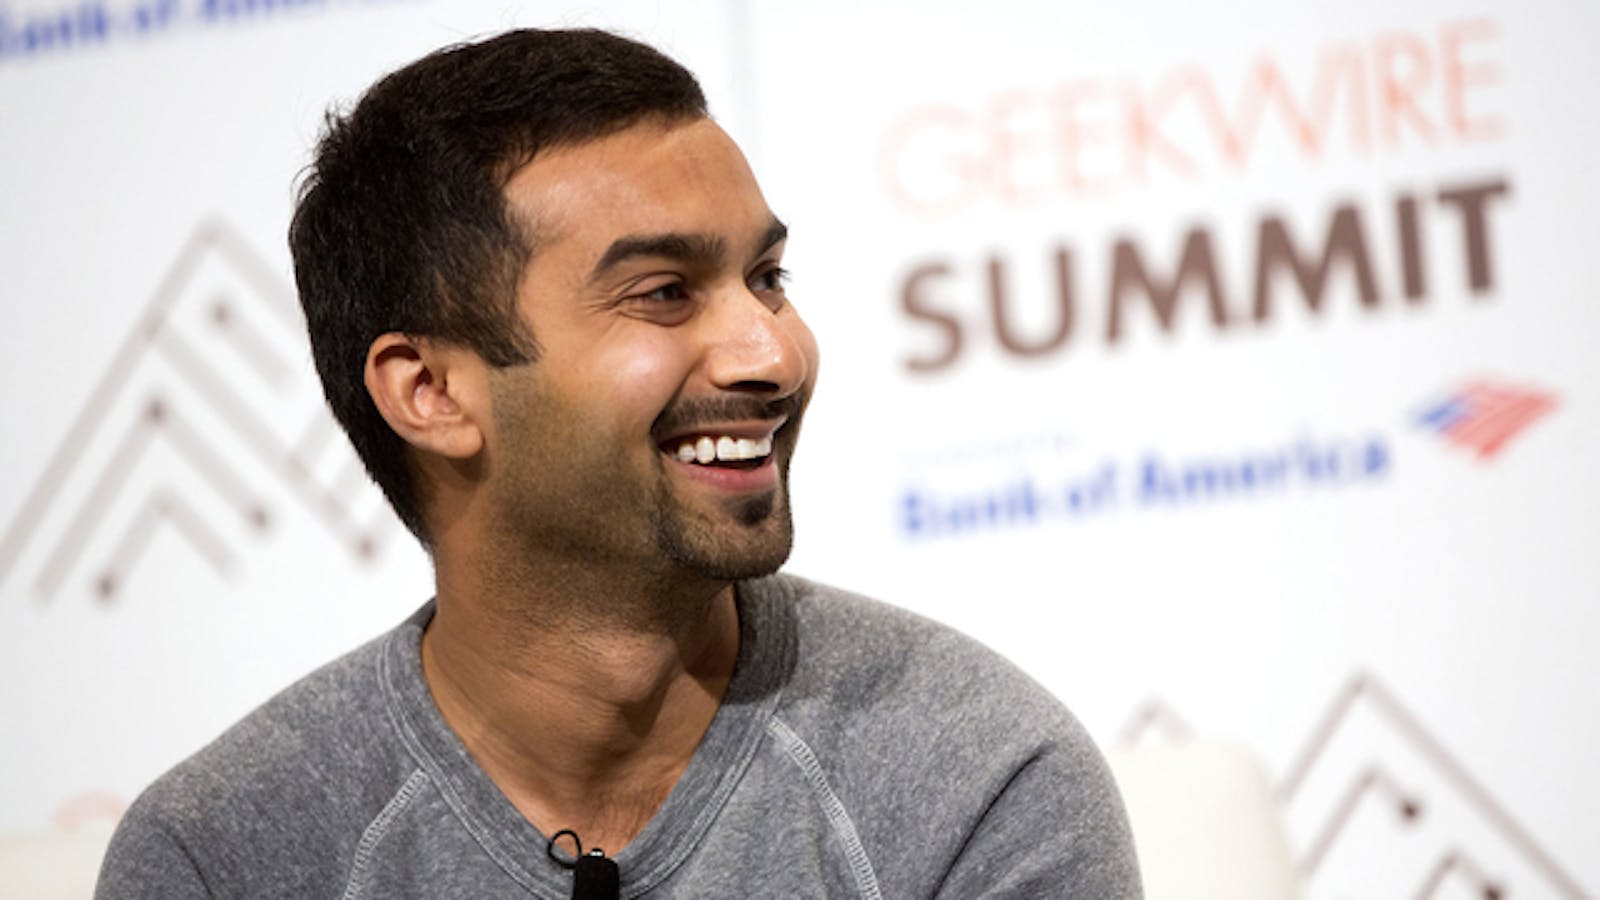 Instacart's founder/CEO Apoorva Mehta. Photo by Bloomberg.